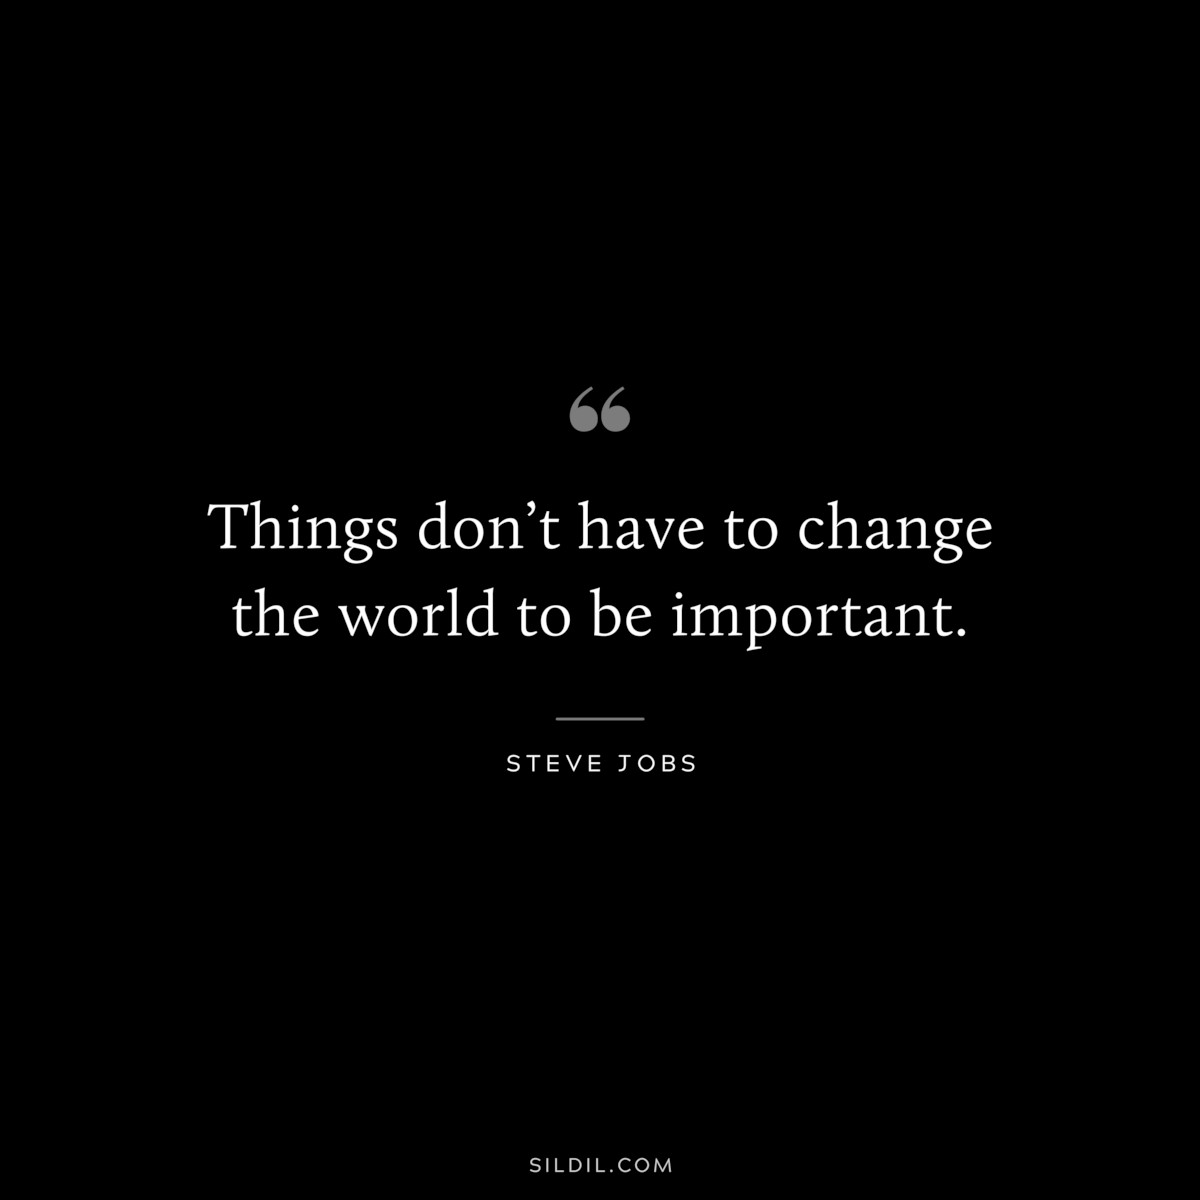 Things don’t have to change the world to be important. ― Steve Jobs